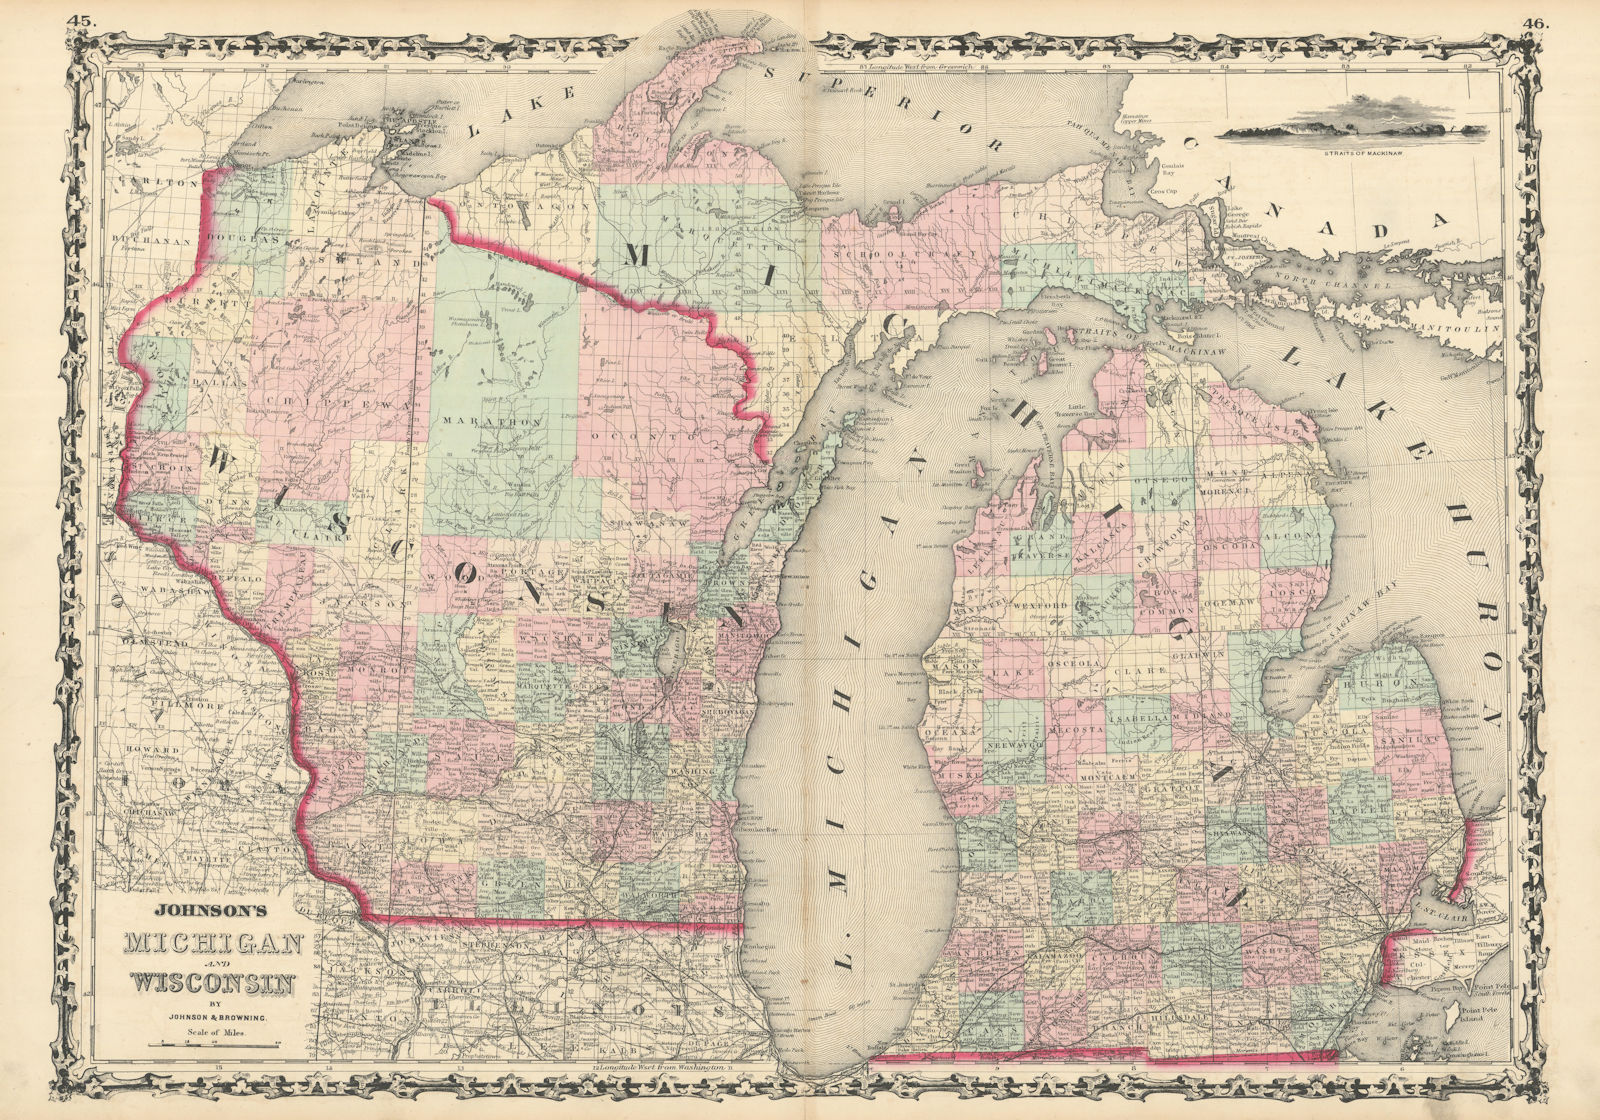 Associate Product Johnson's Wisconsin & Michigan. State map showing counties. Great Lakes 1861